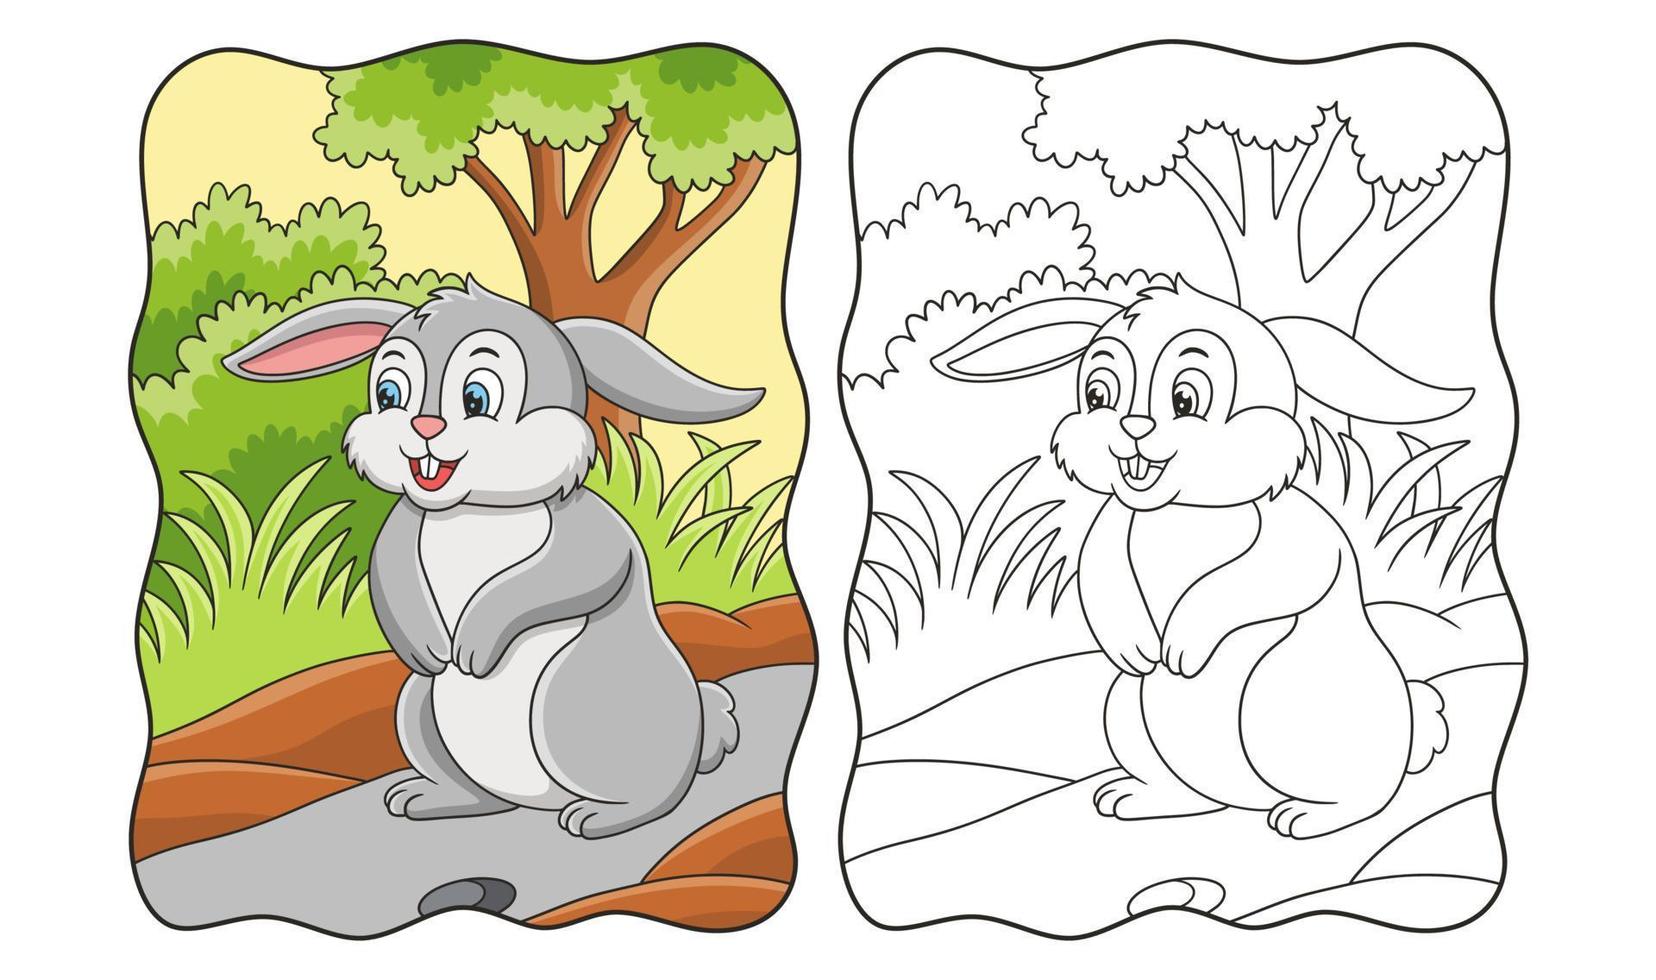 cartoon illustration The rabbit standing in the middle of the forest looks around for food book or page for kids vector